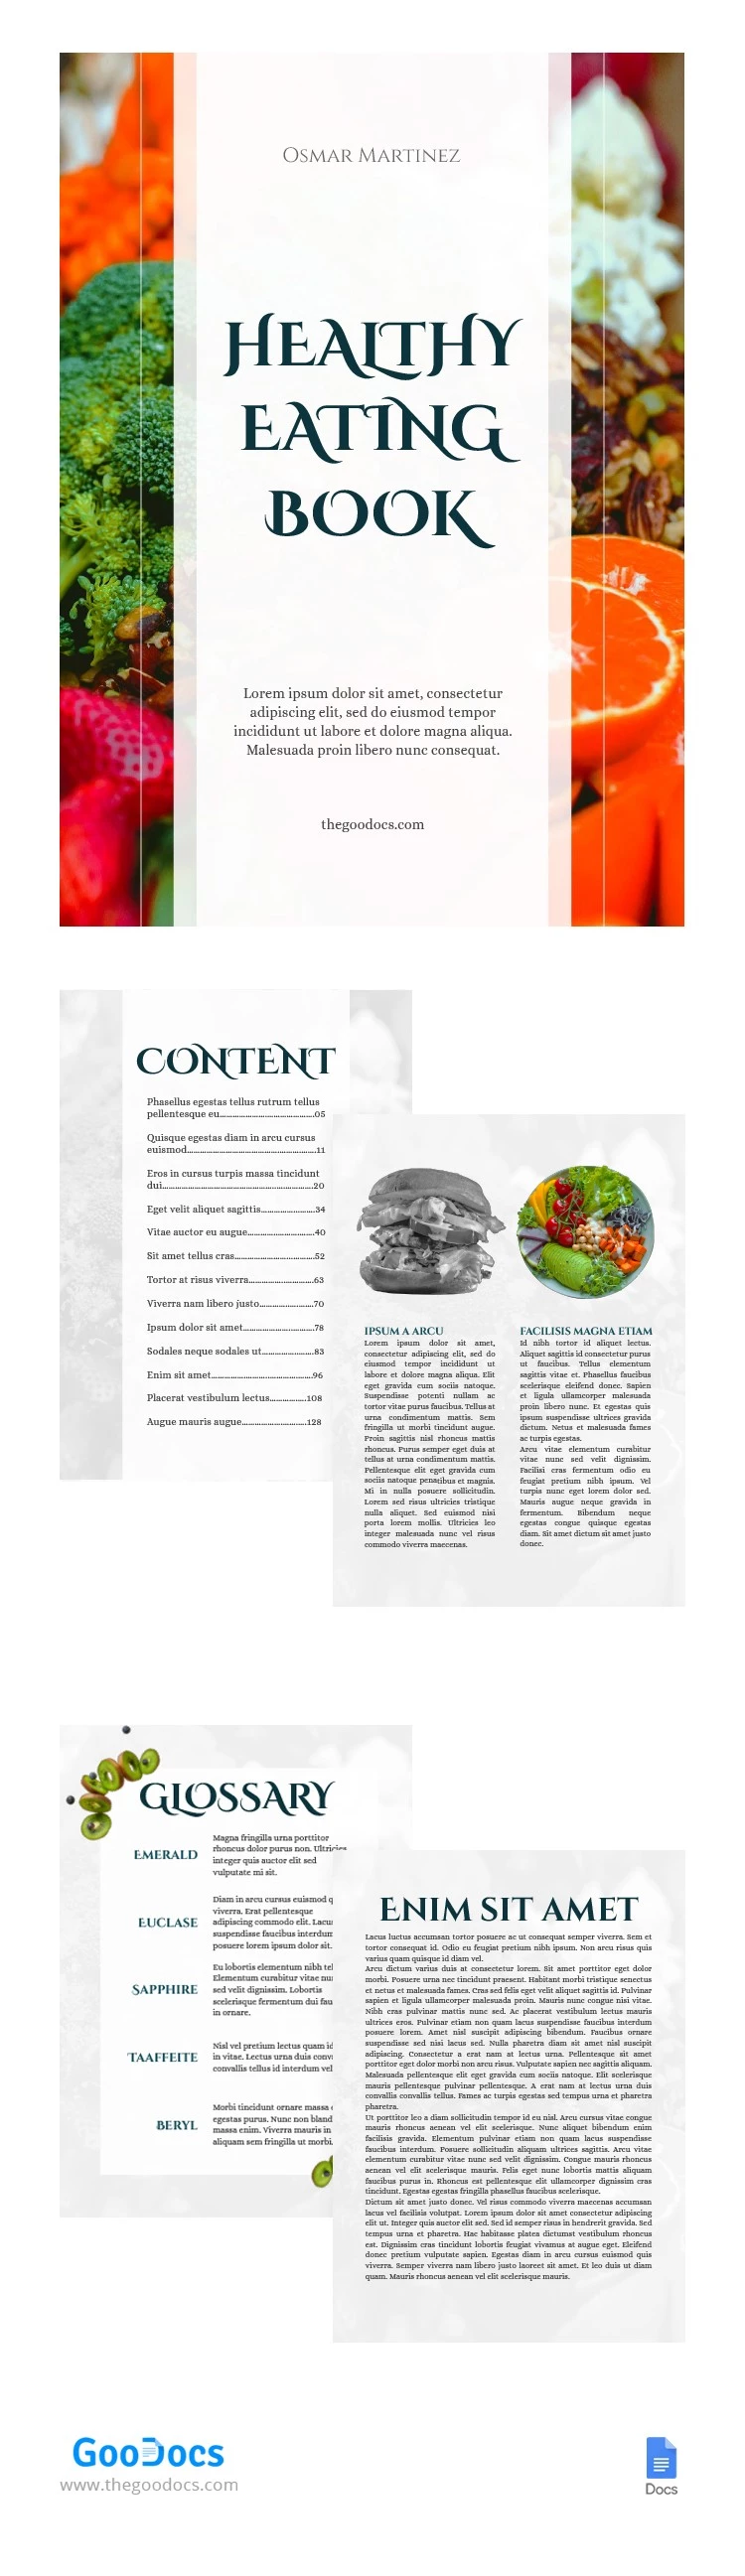 Vegetable and Fruit Health Book - free Google Docs Template - 10065238